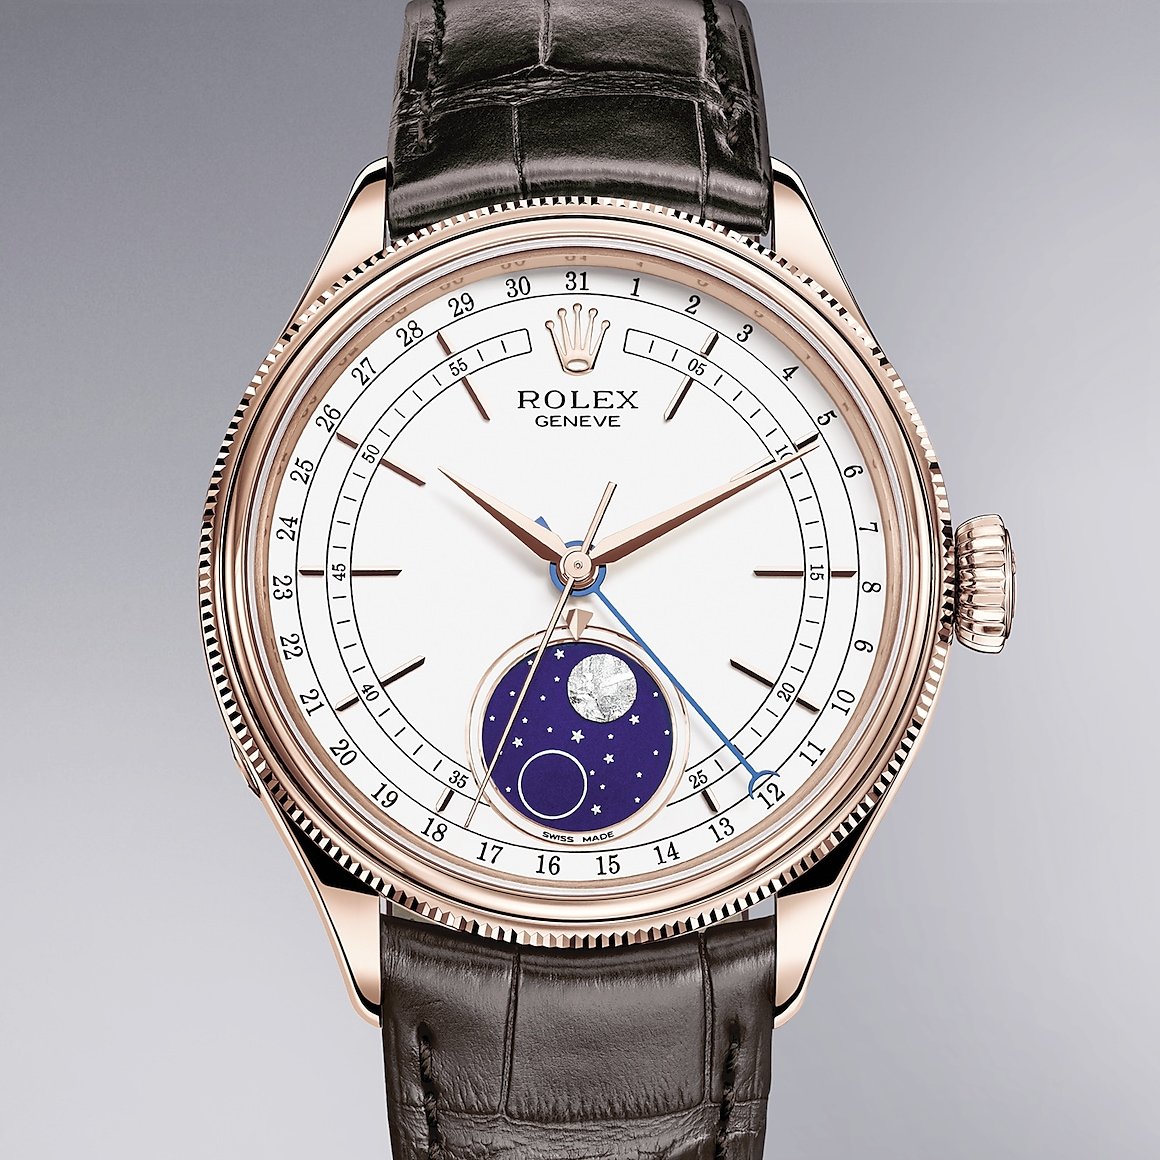 Rolex Cellini 39 in everose gold and polished vinish m50535-0002 at David M Robinson